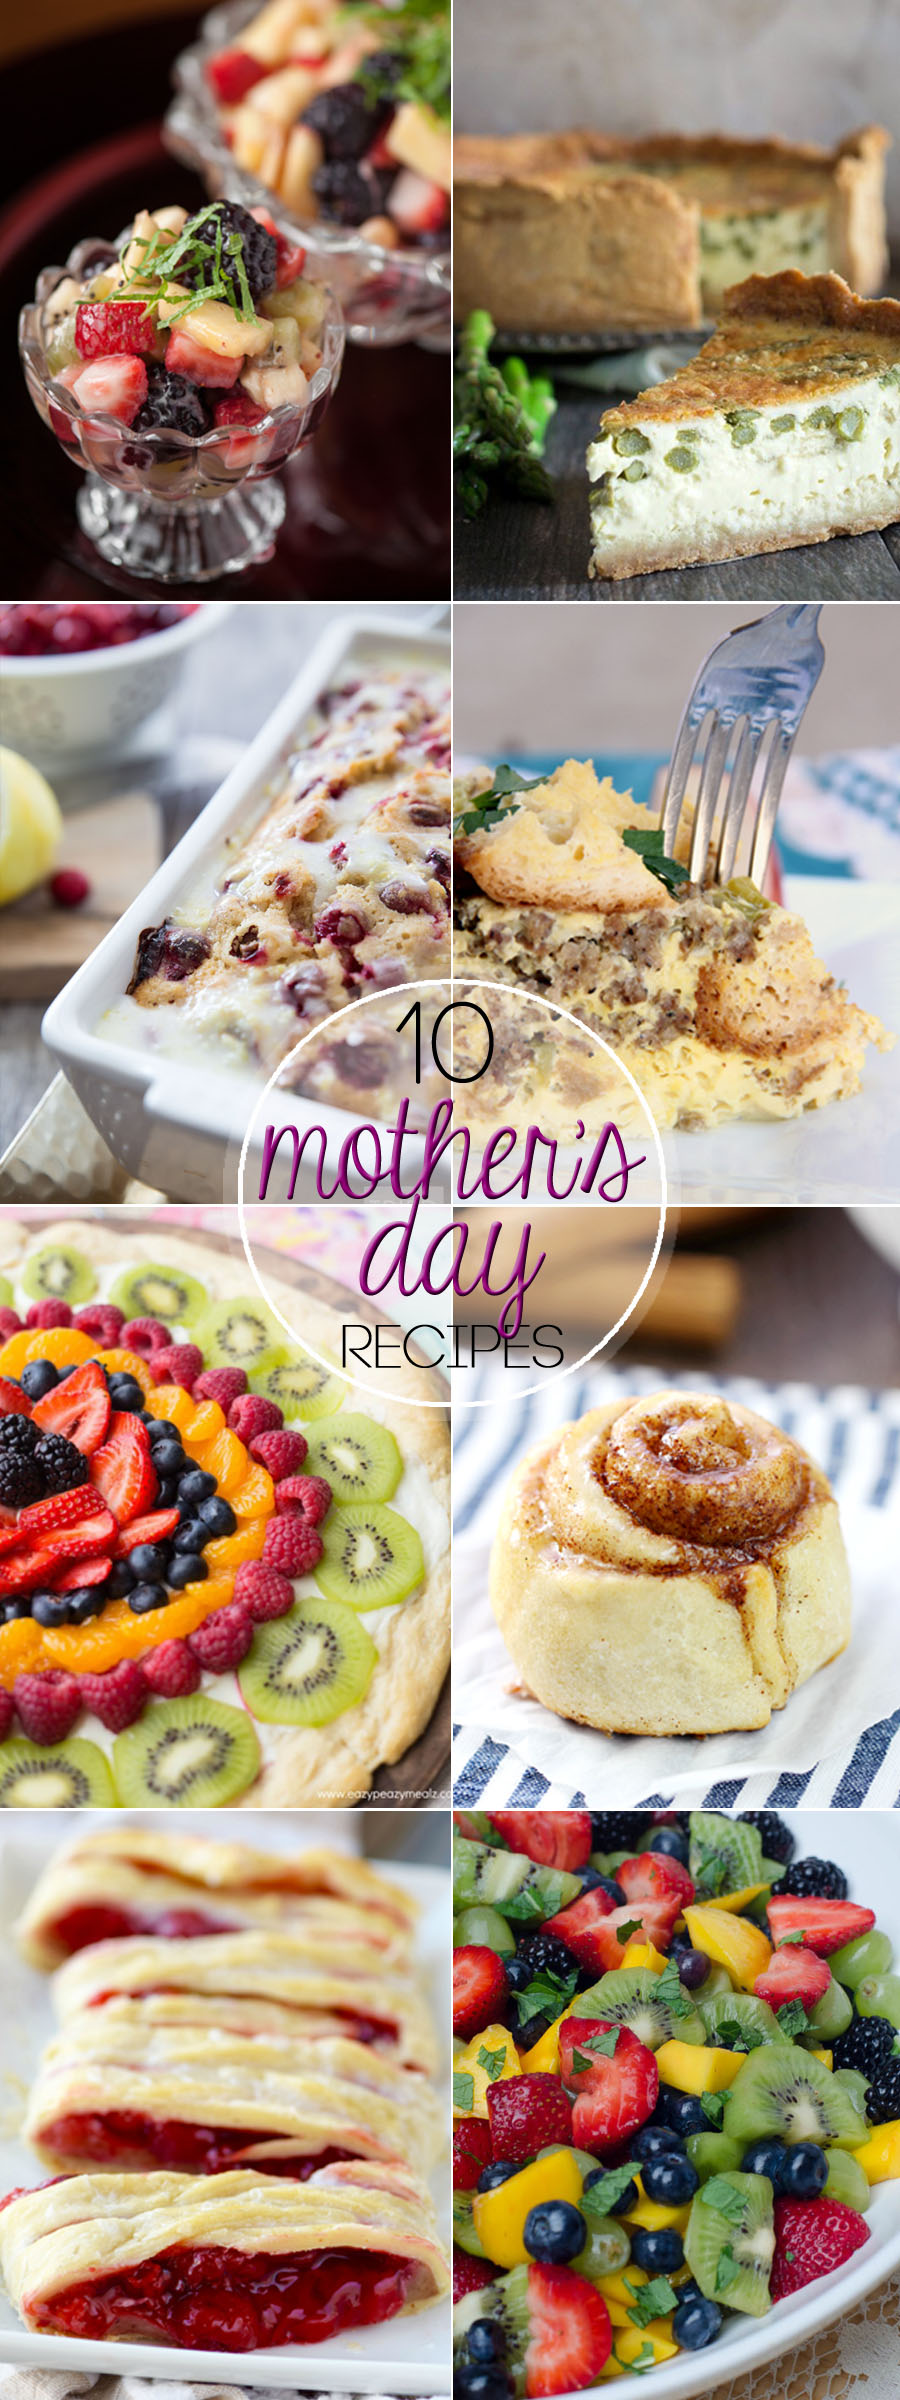 Whether you are hosting Mother's Day Brunch or just want to surprise mom with a special breakfast, these 10 MOTHER'S DAY BRUNCH IDEAS are just what you need for the perfect meal.